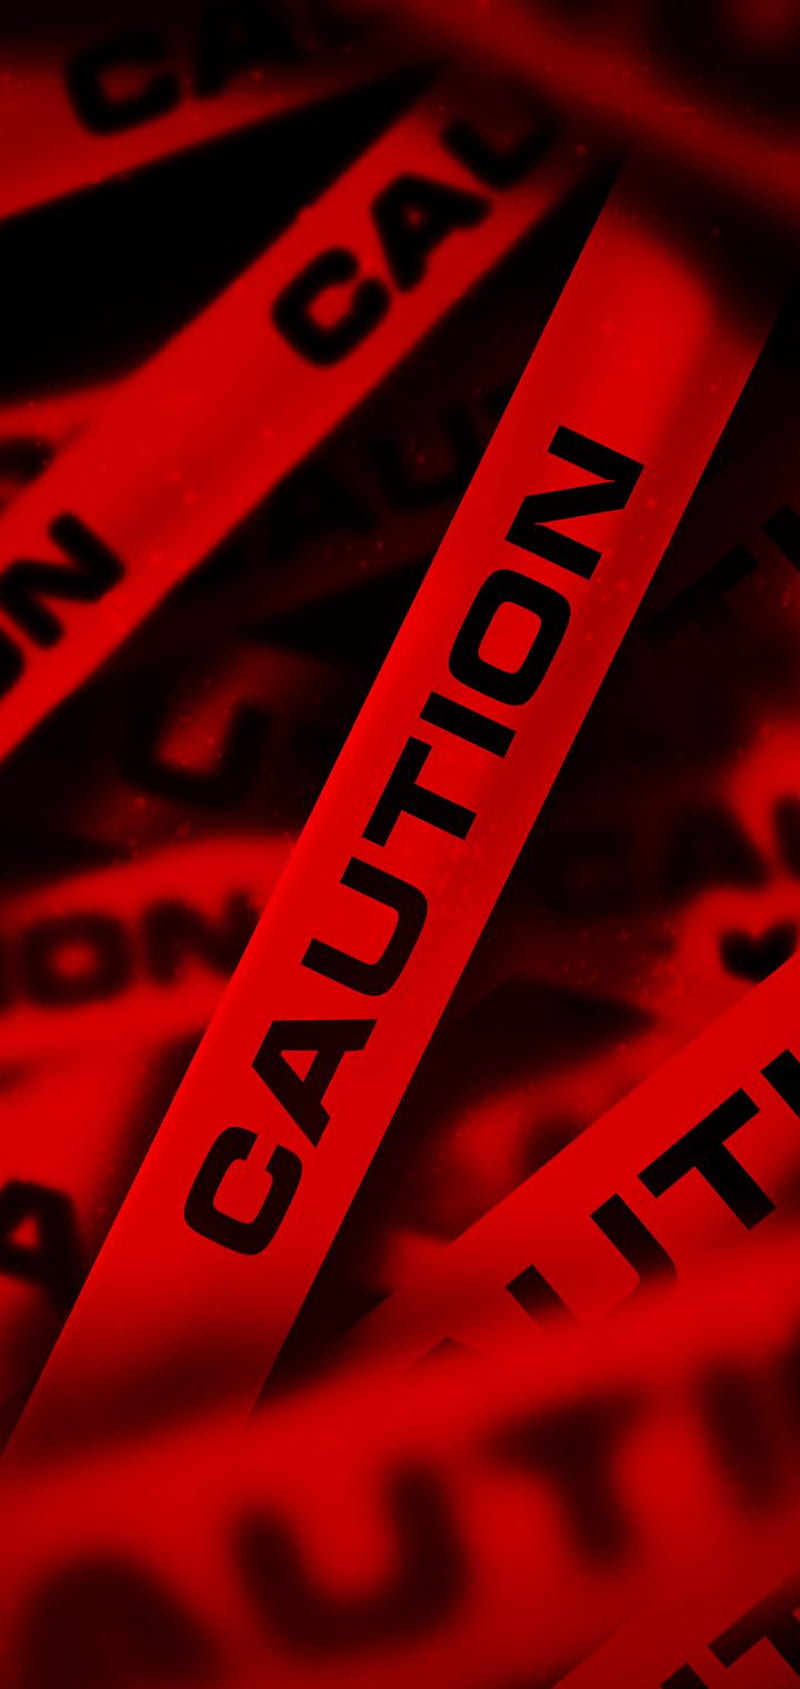 Warning Or Caution Tape On Black Background, Warning Background, Caution  Tape Background, Background Background Image And Wallpaper for Free Download